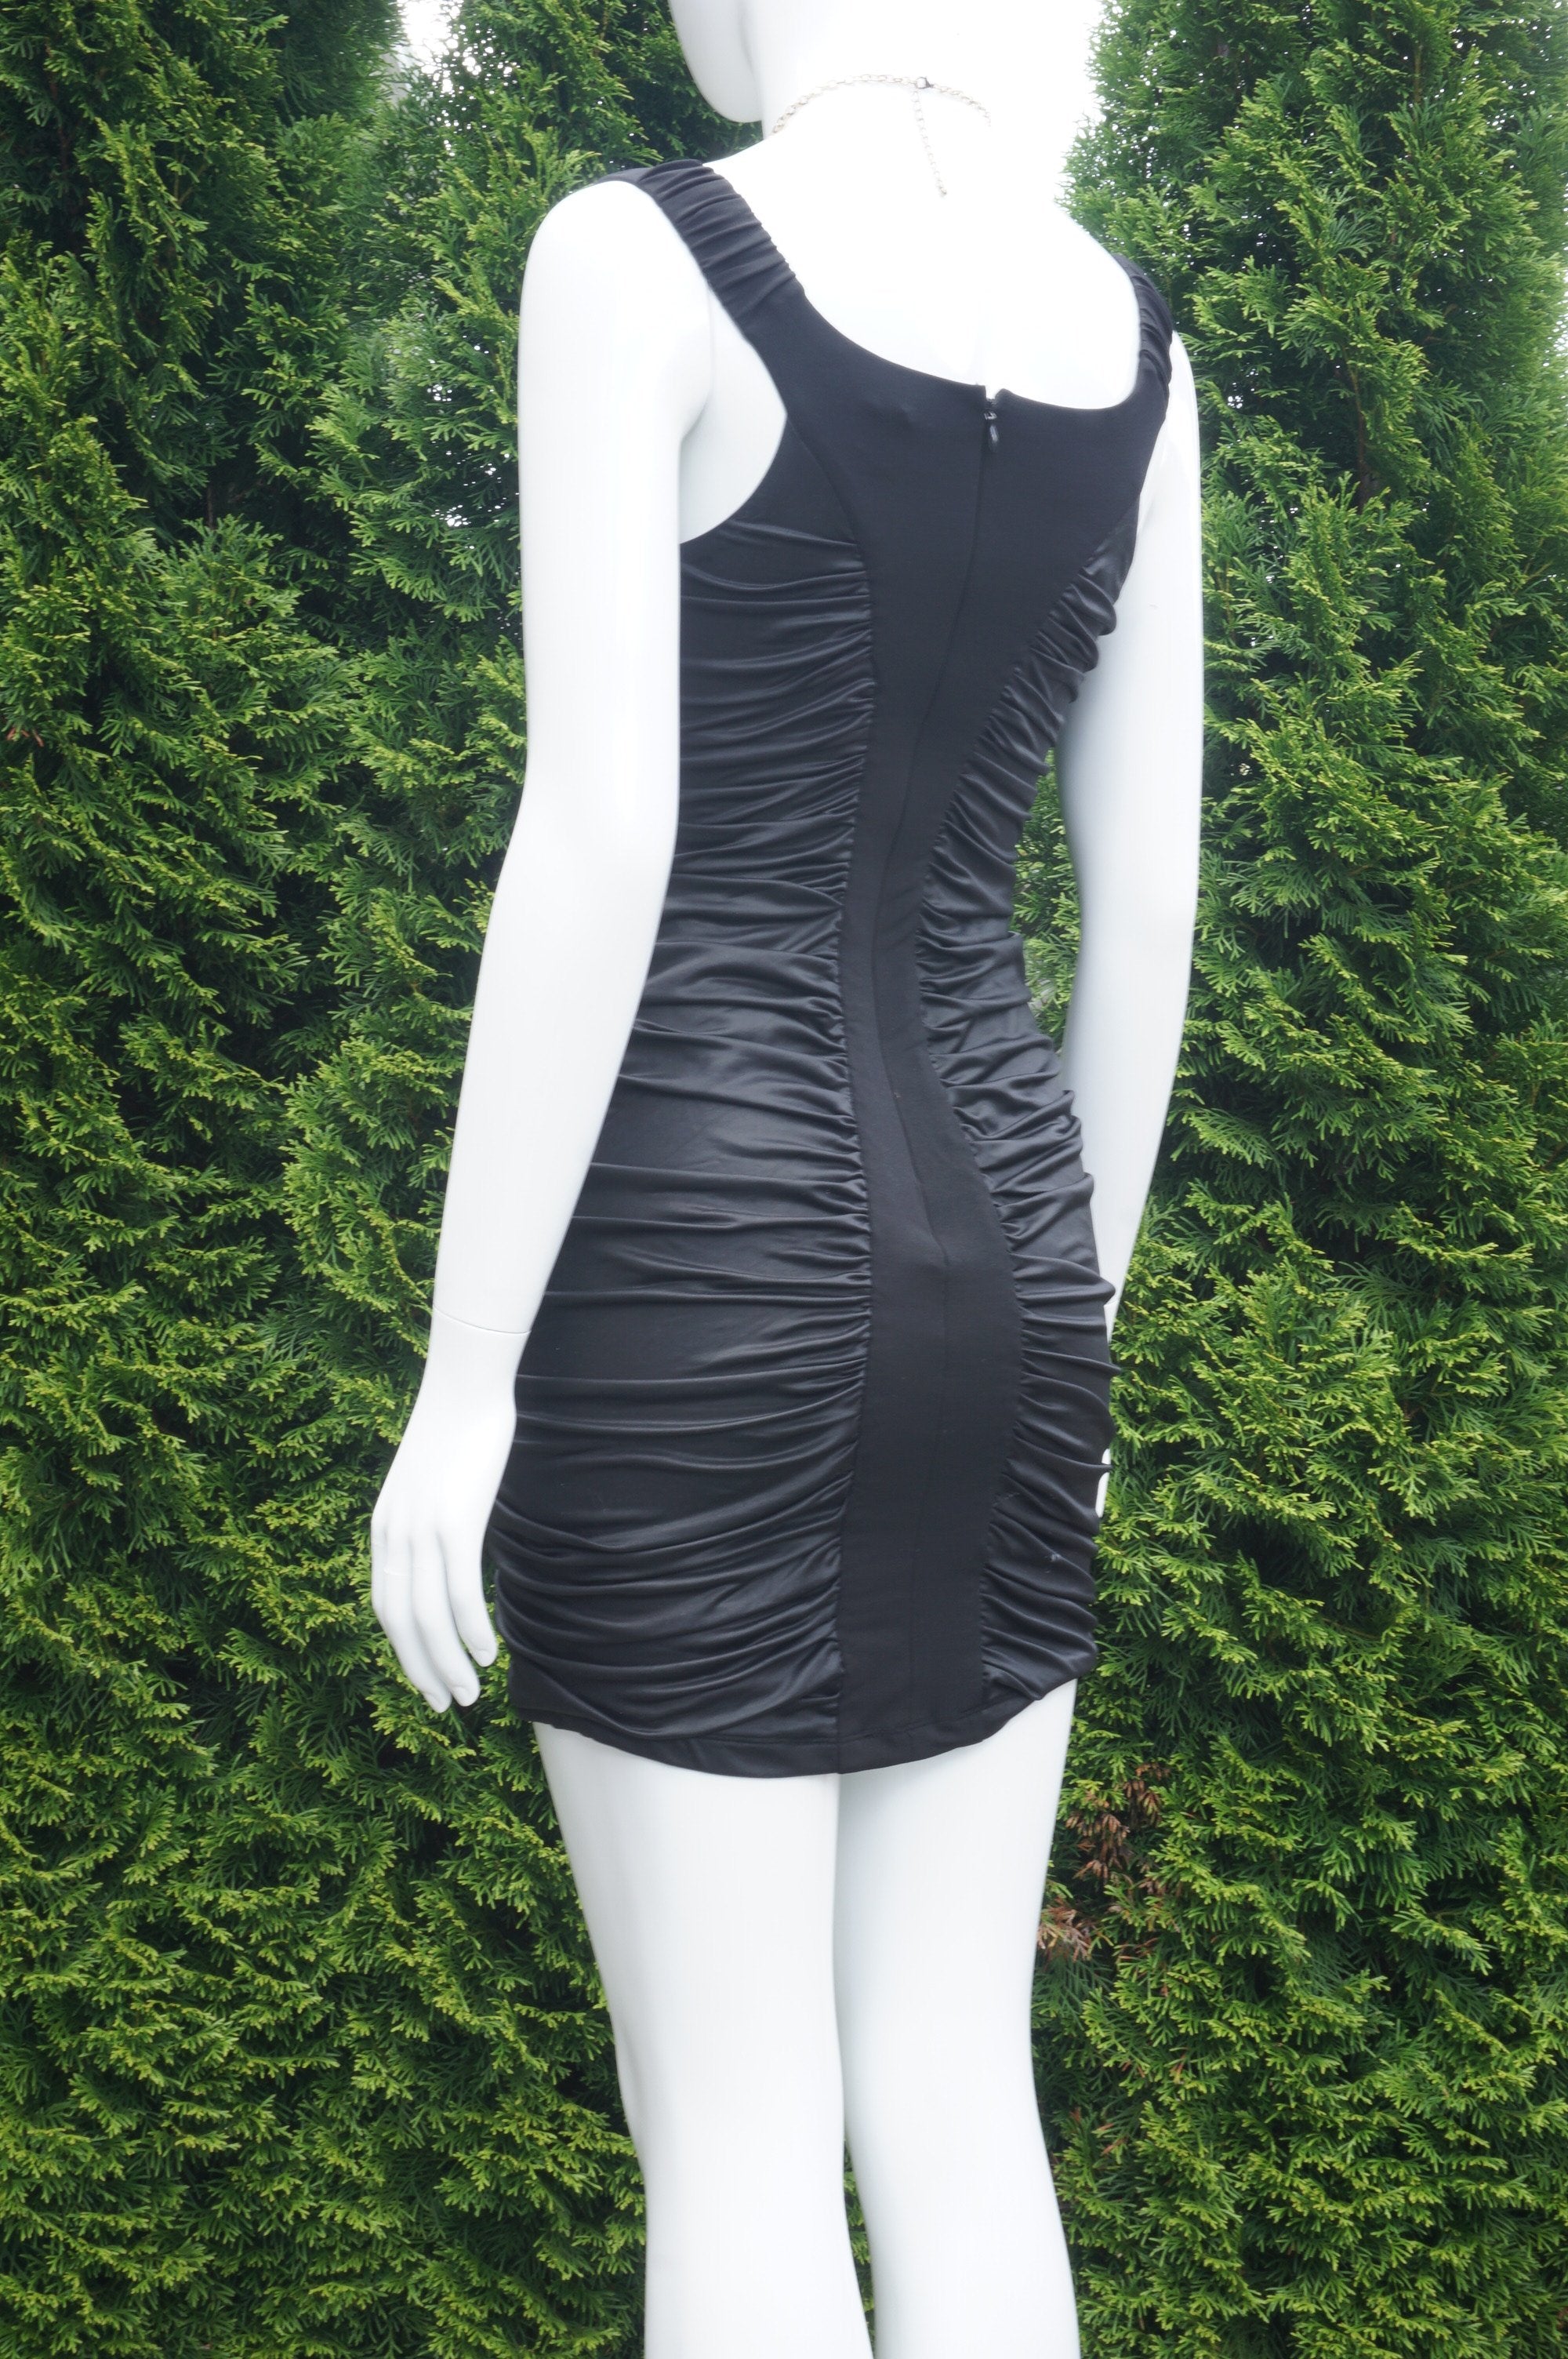 Bebe Sleeveless Stretchy Black Mini Dress, Very Stretchy Dress. Bust 30 inches, waist 26 inches, length 30 inches., Black, 94% Polyester, 6% Spandex. Lining: 100% Polyester, women's Dresses & Rompers, women's Black Dresses & Rompers, Bebe women's Dresses & Rompers, mini dress, bodycon dress, black mini dress